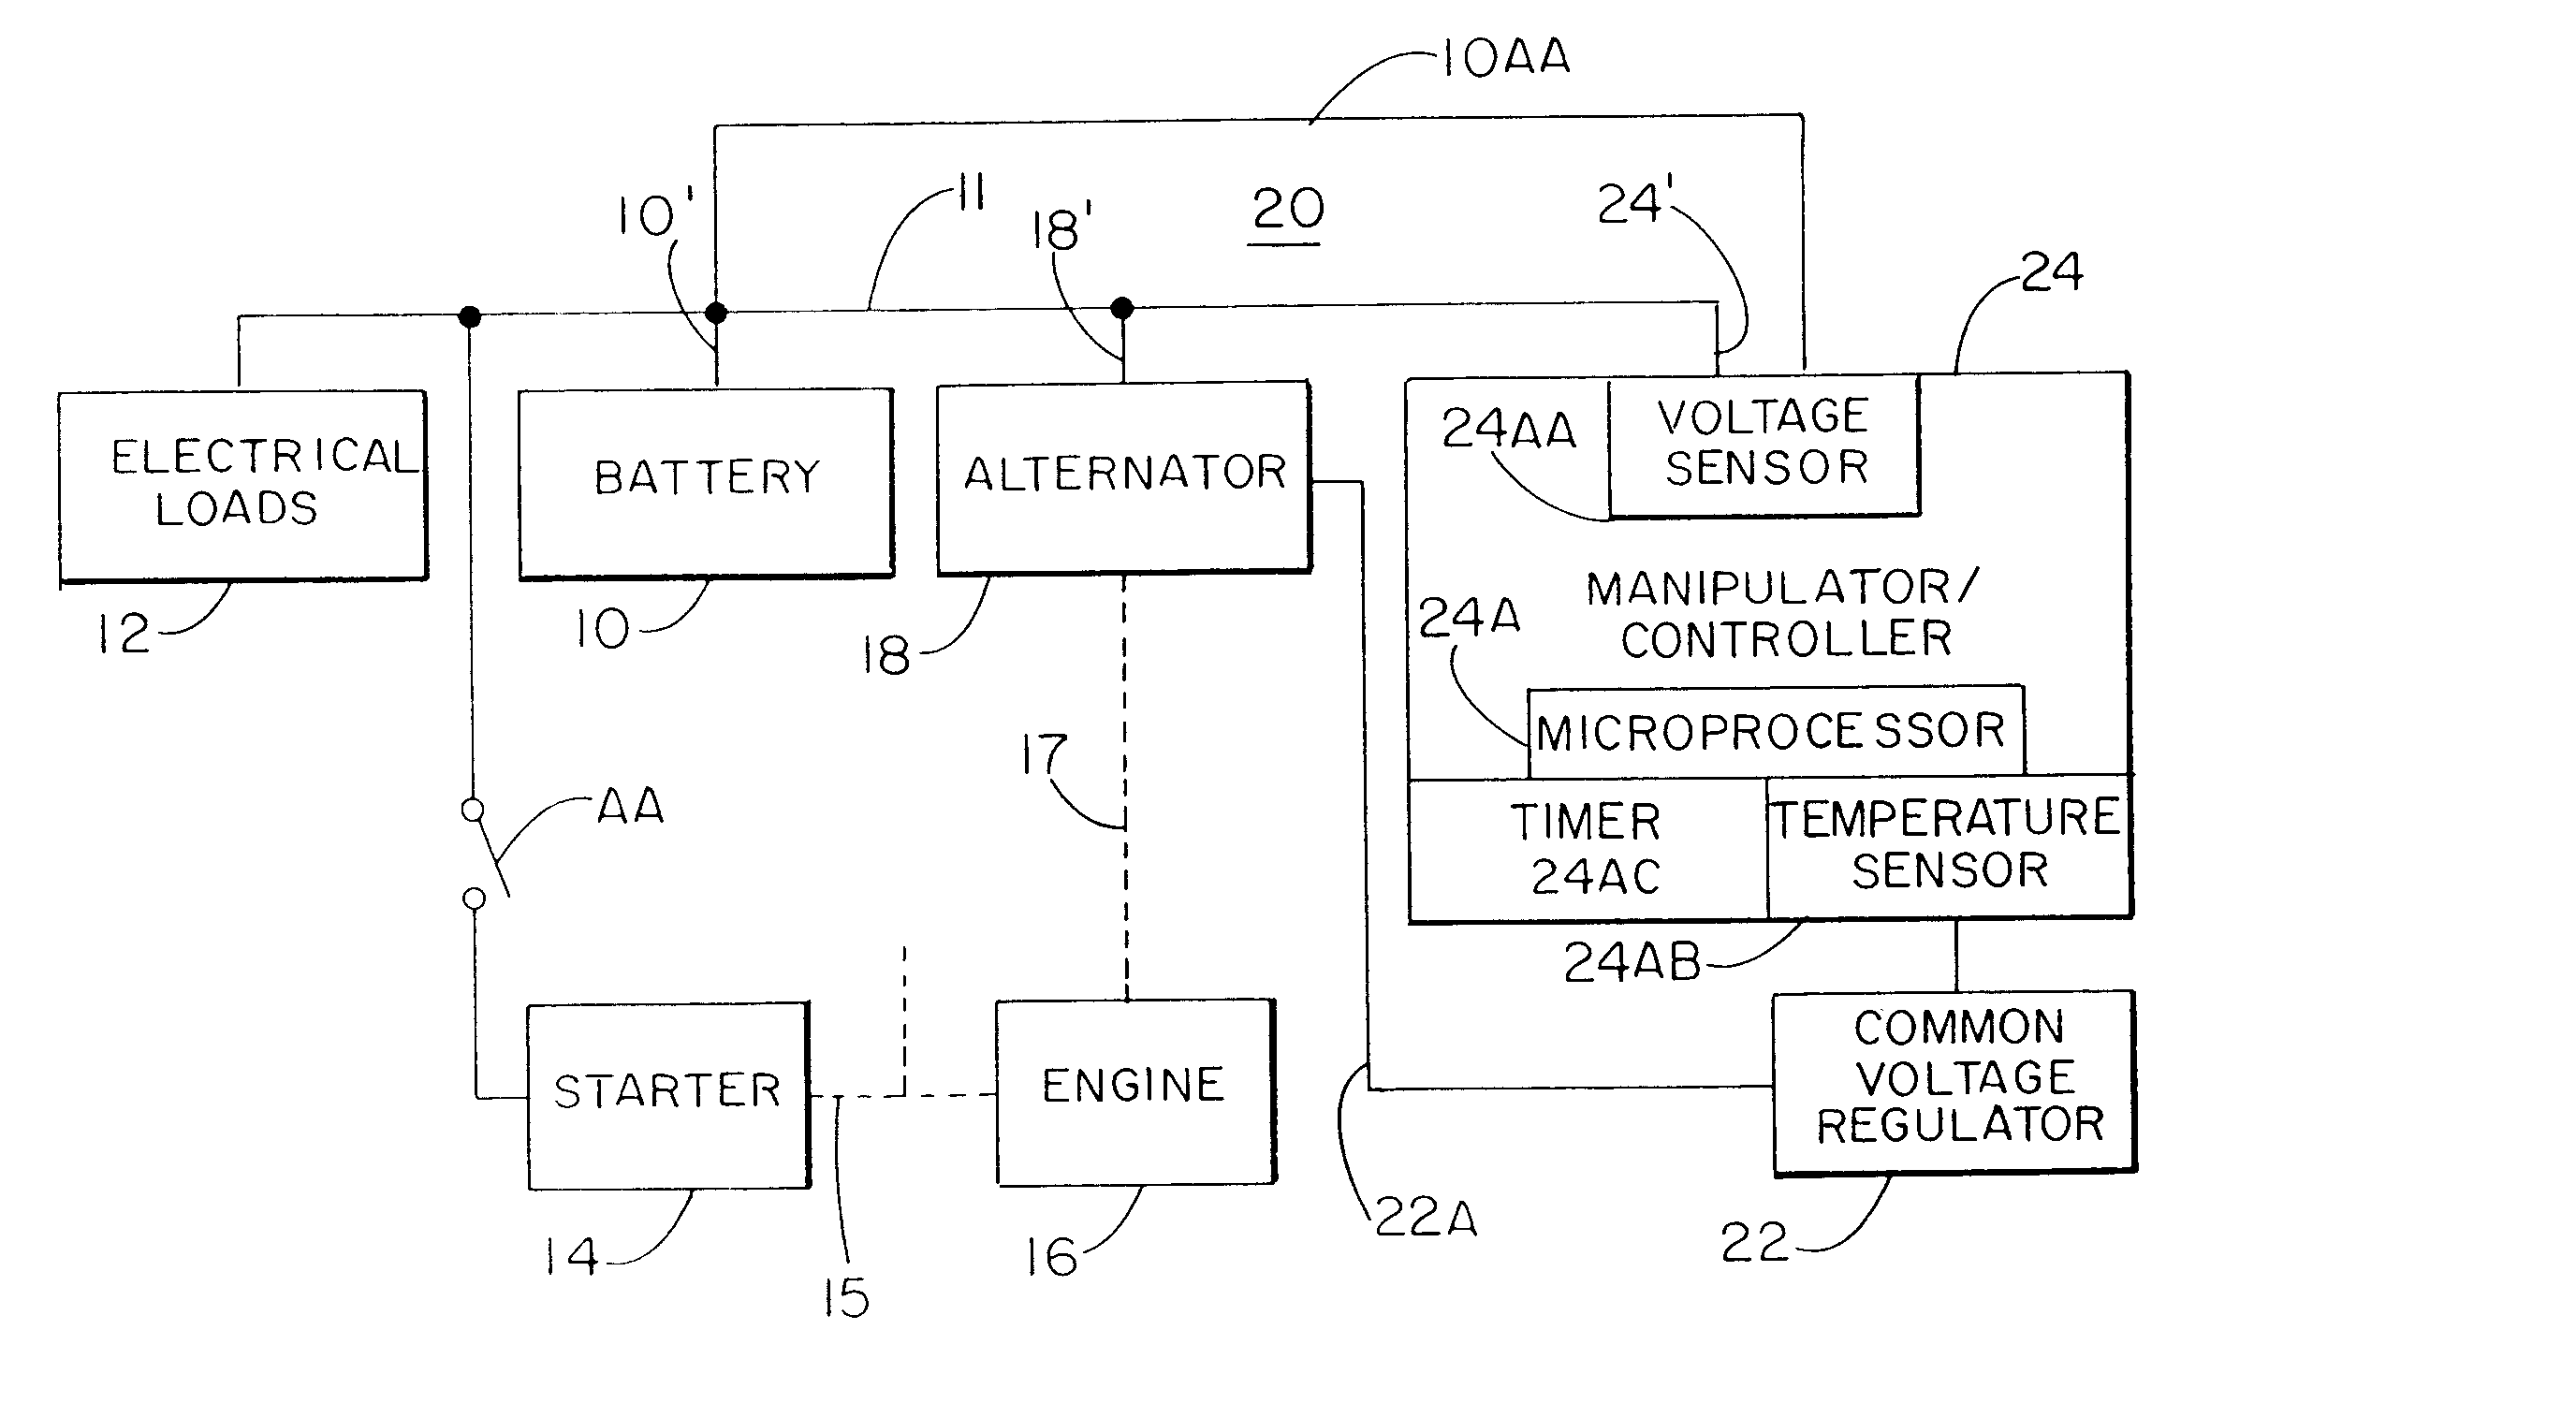 Battery charger apparatus